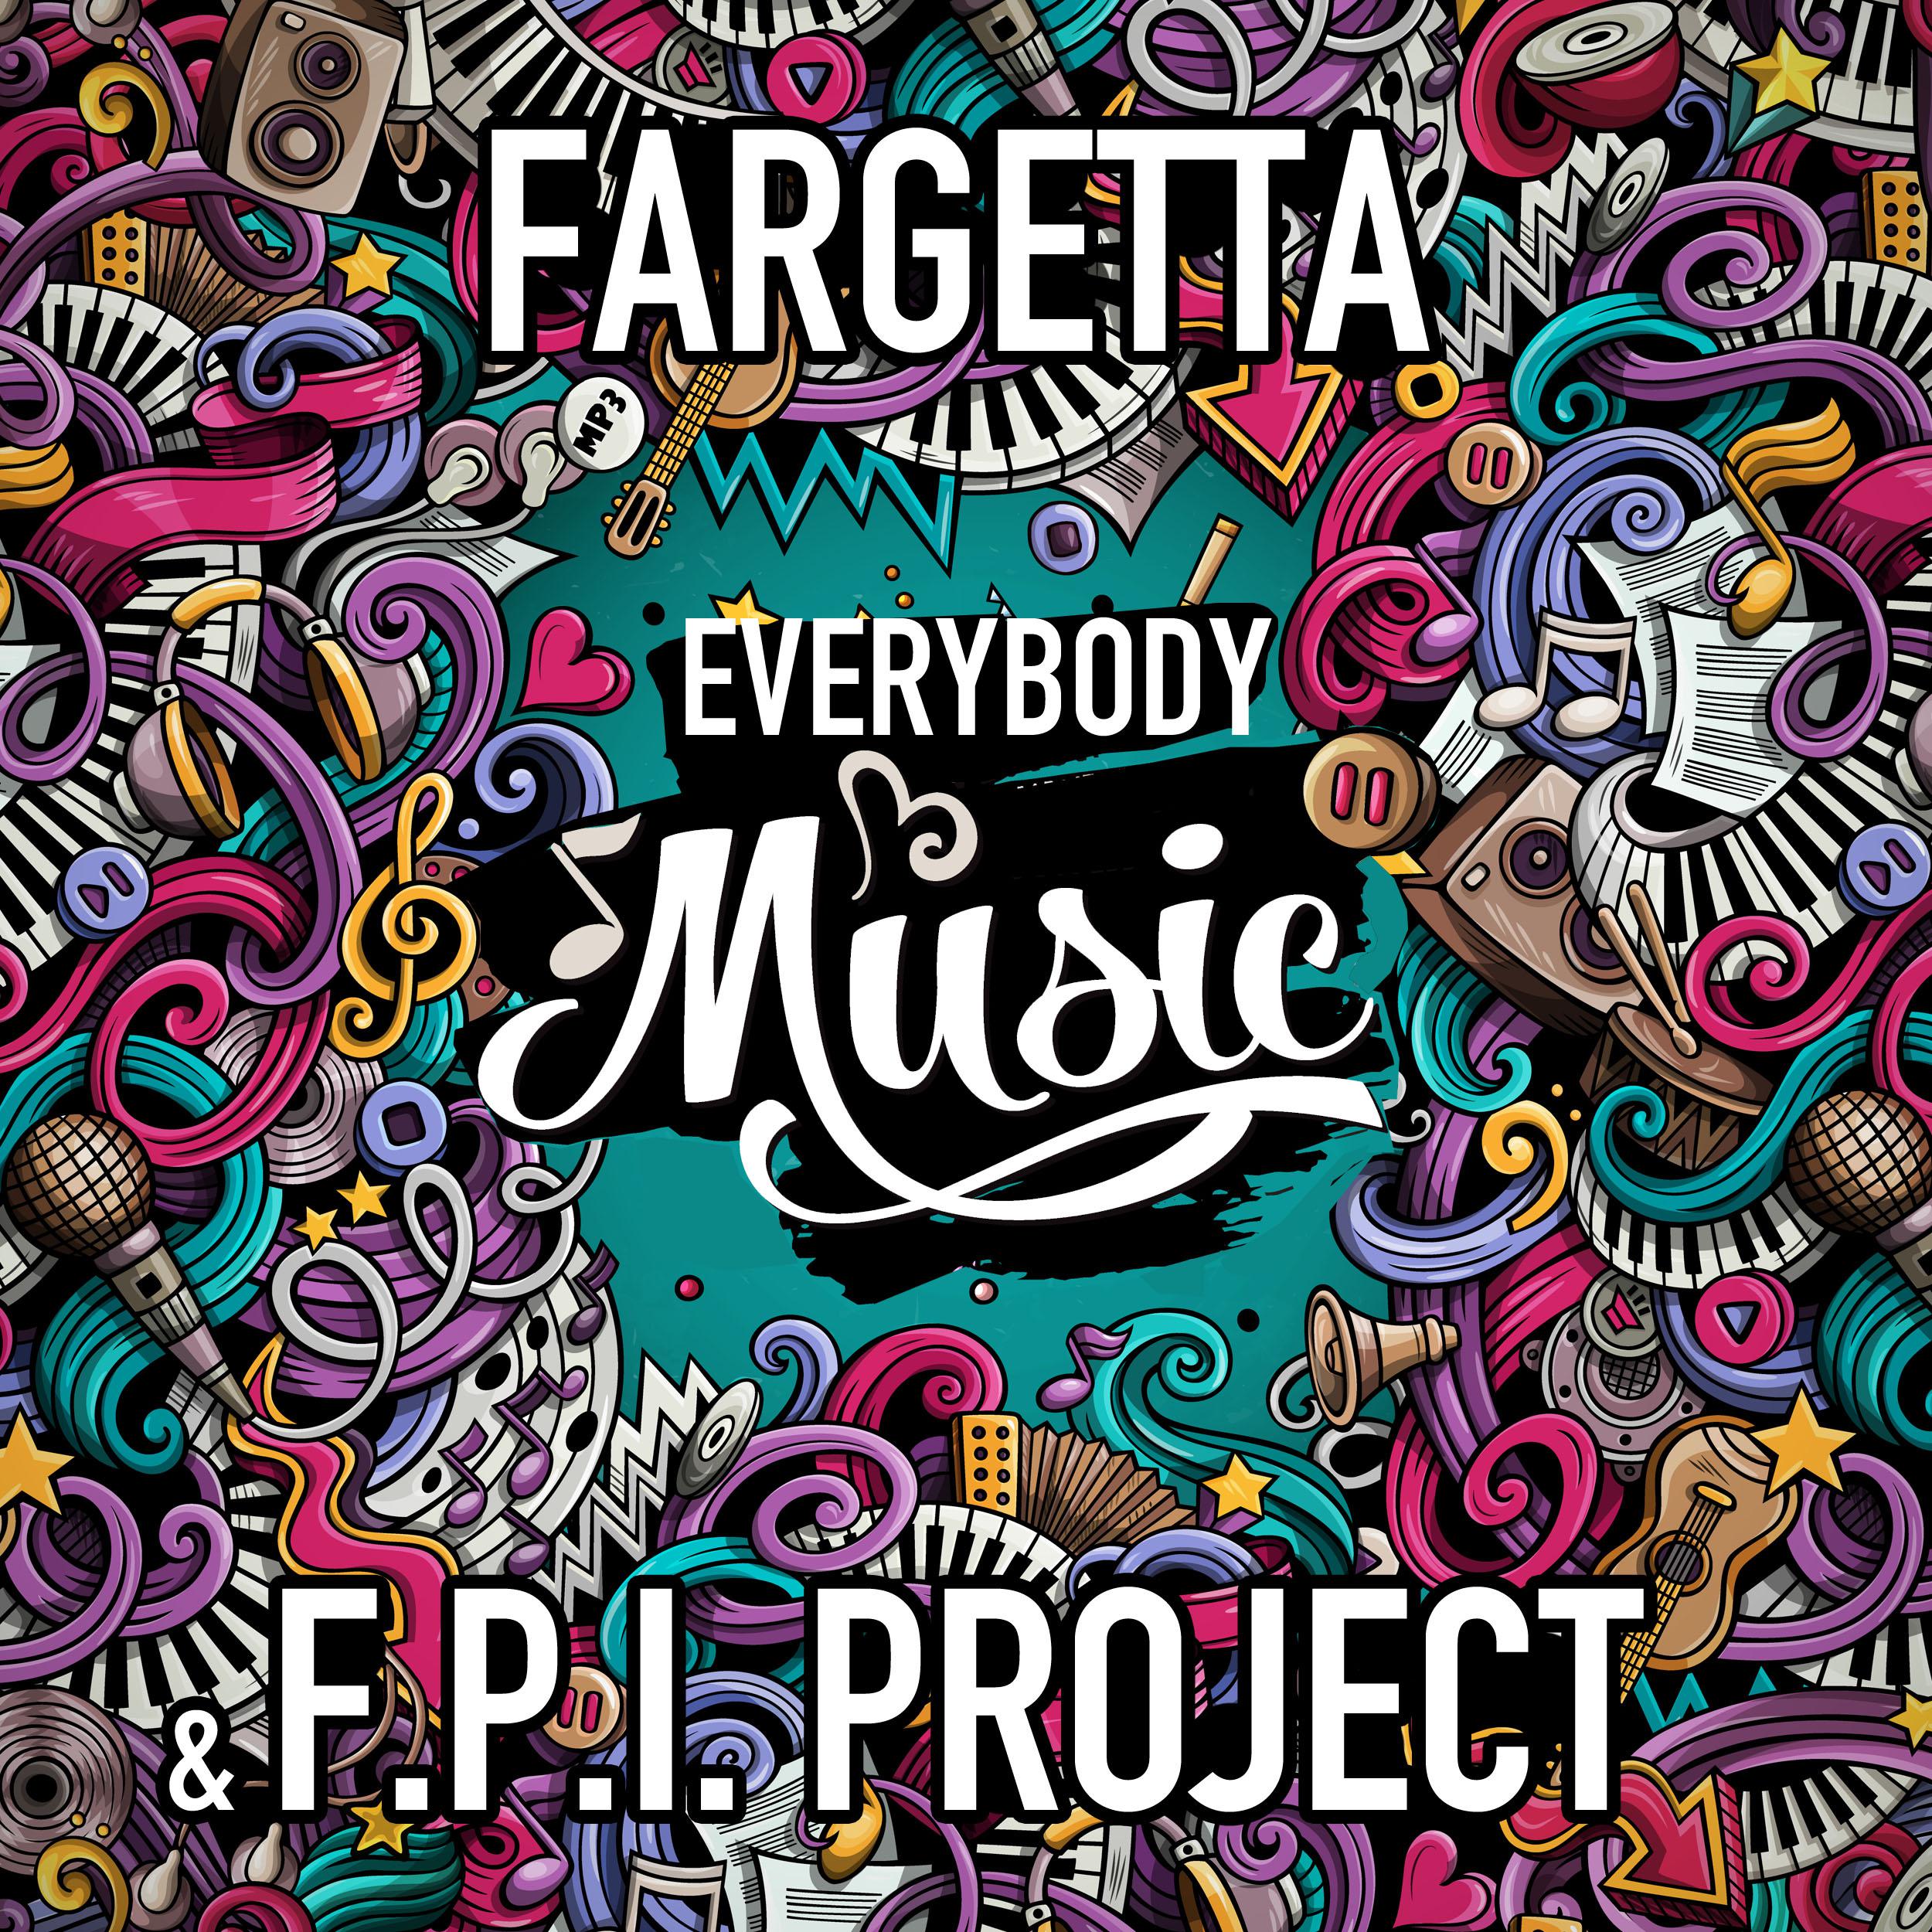 Fargetta - Everybody Music (Kaarlos & Mozza, Marco Fratty Extended Mix)